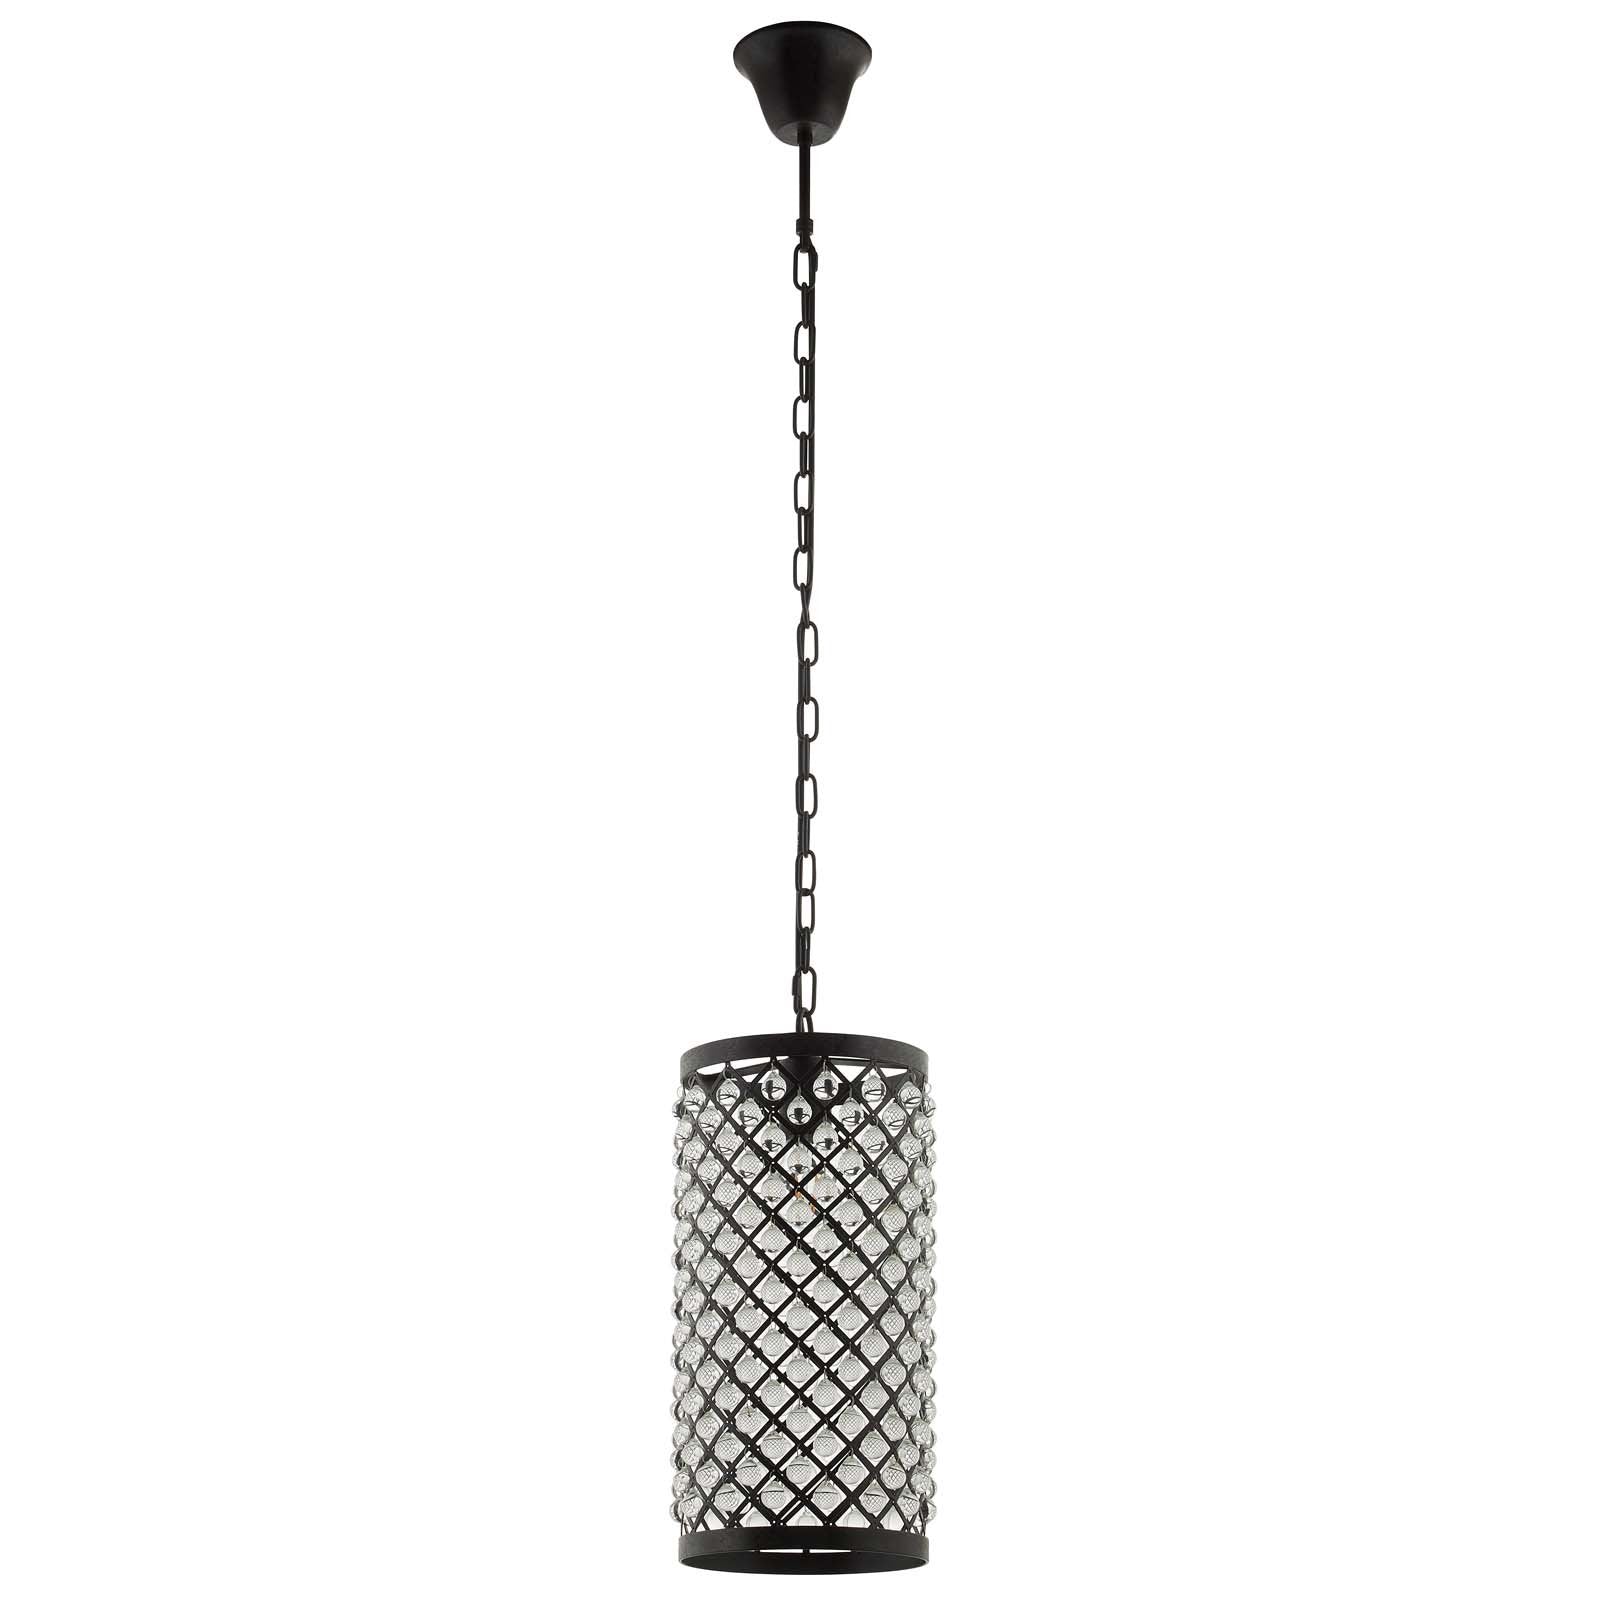 Reflect Glass and Metal Pendant Chandelier - East Shore Modern Home Furnishings